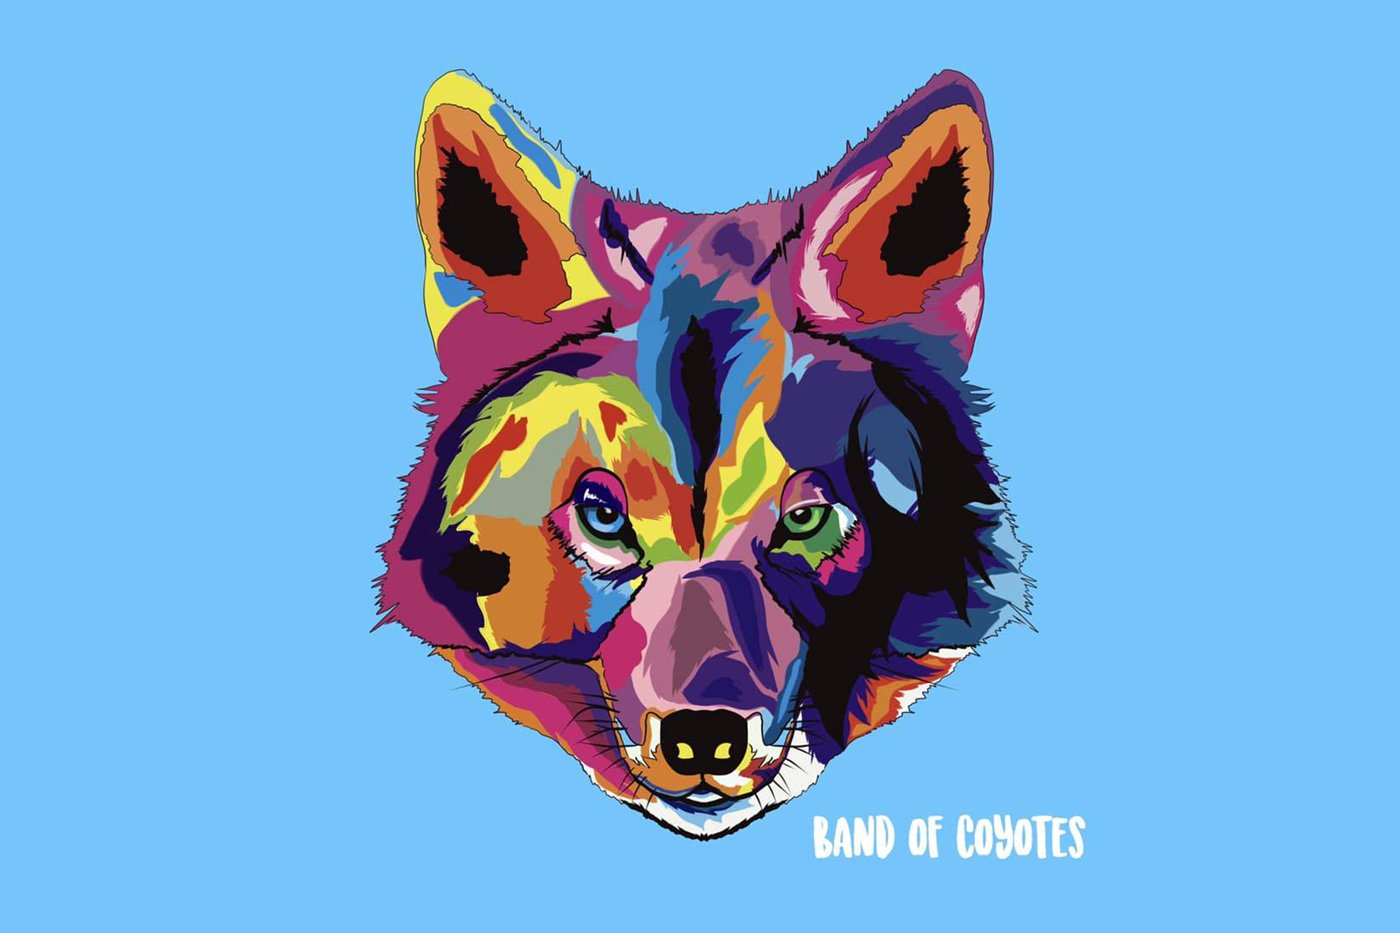 Band of Coyotes